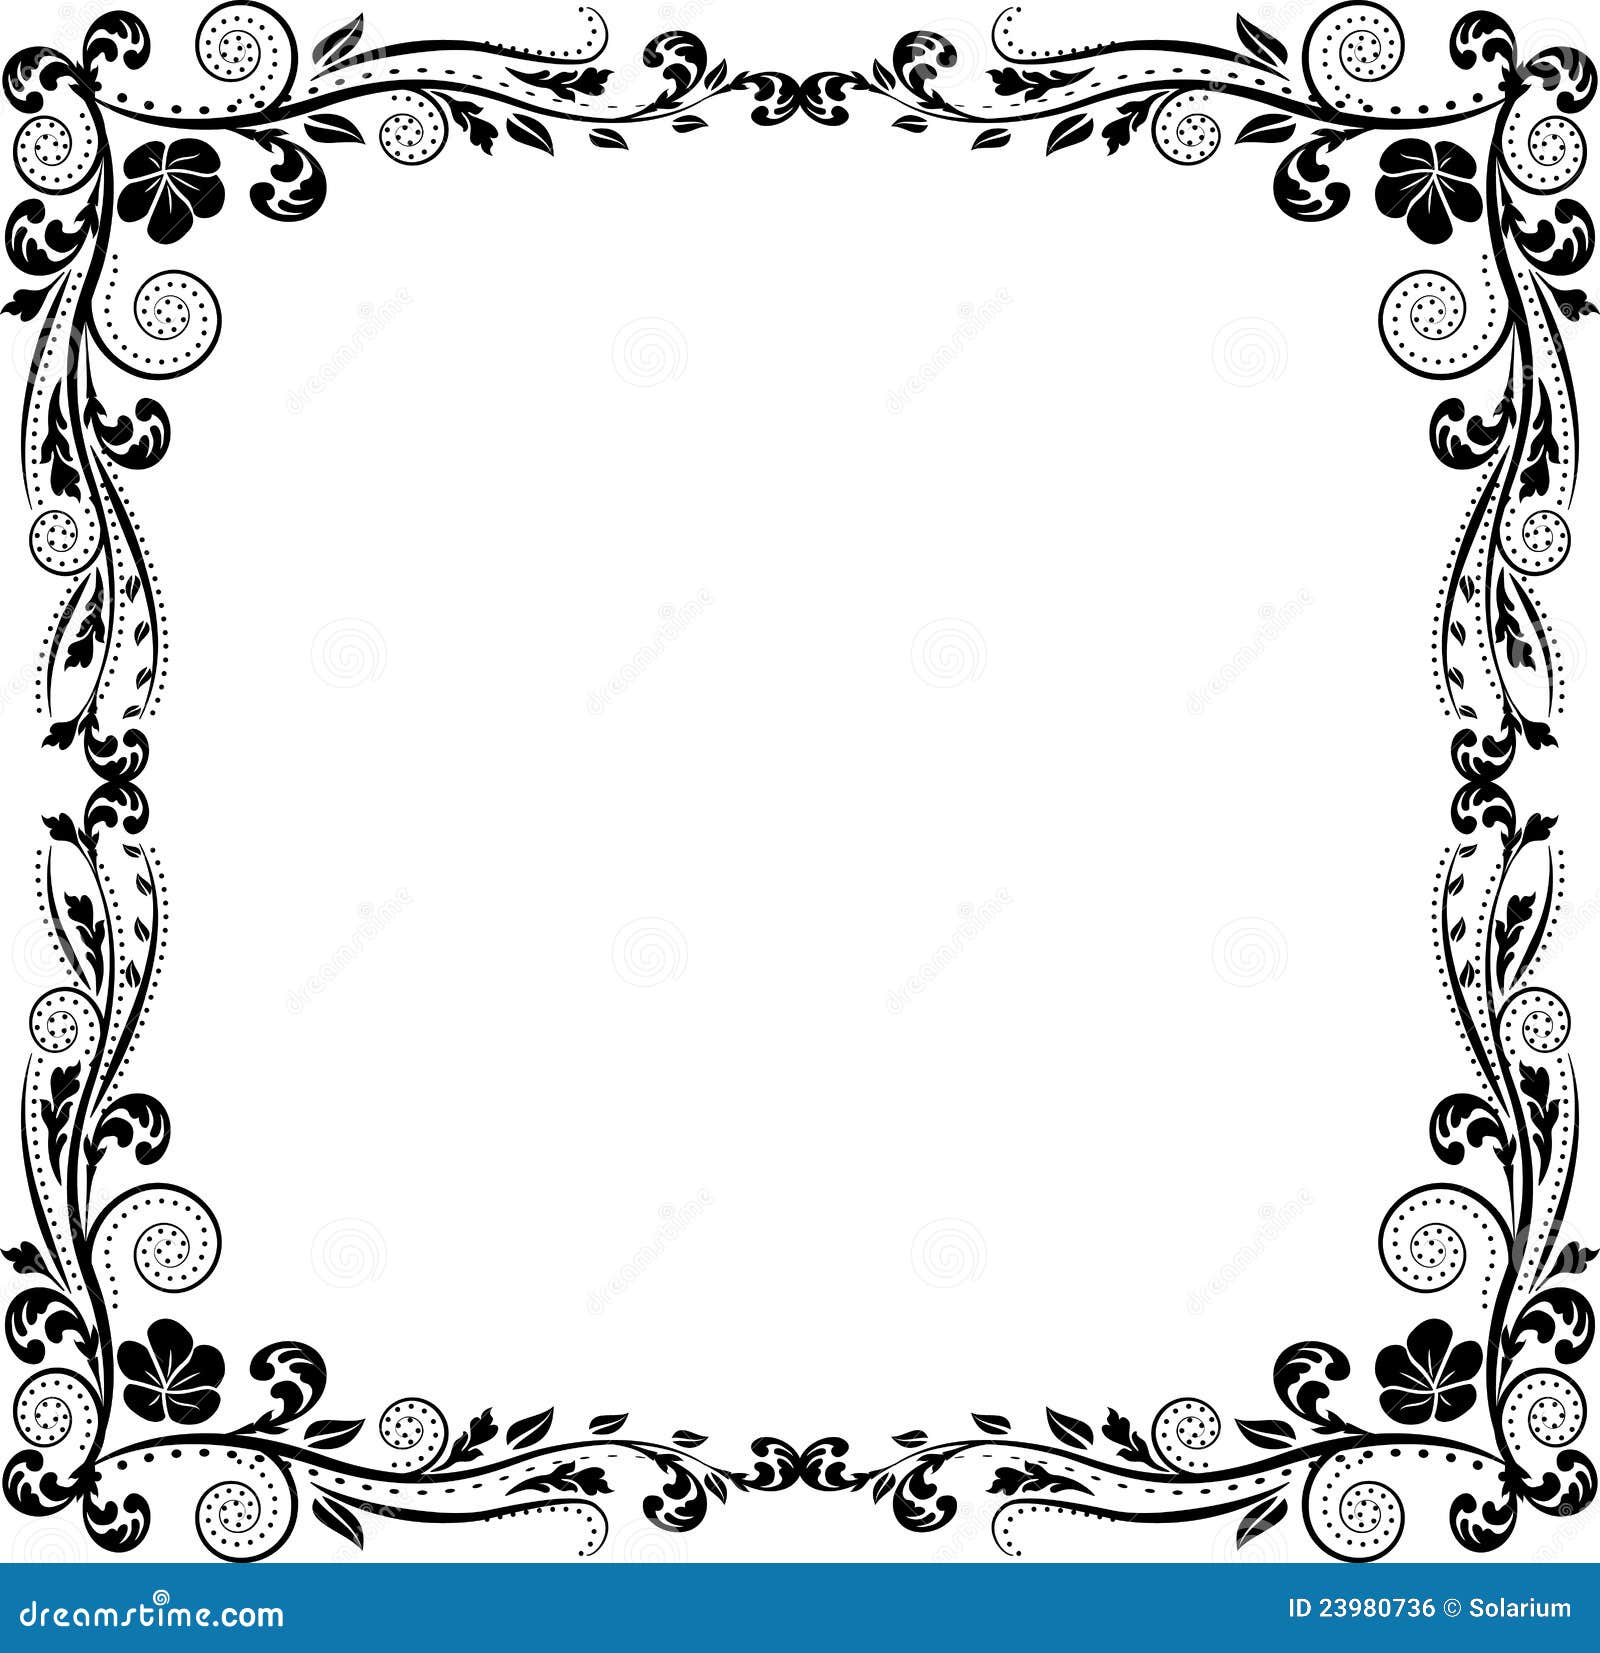 Frame stock vector. Illustration of clipart, decoration - 23980736